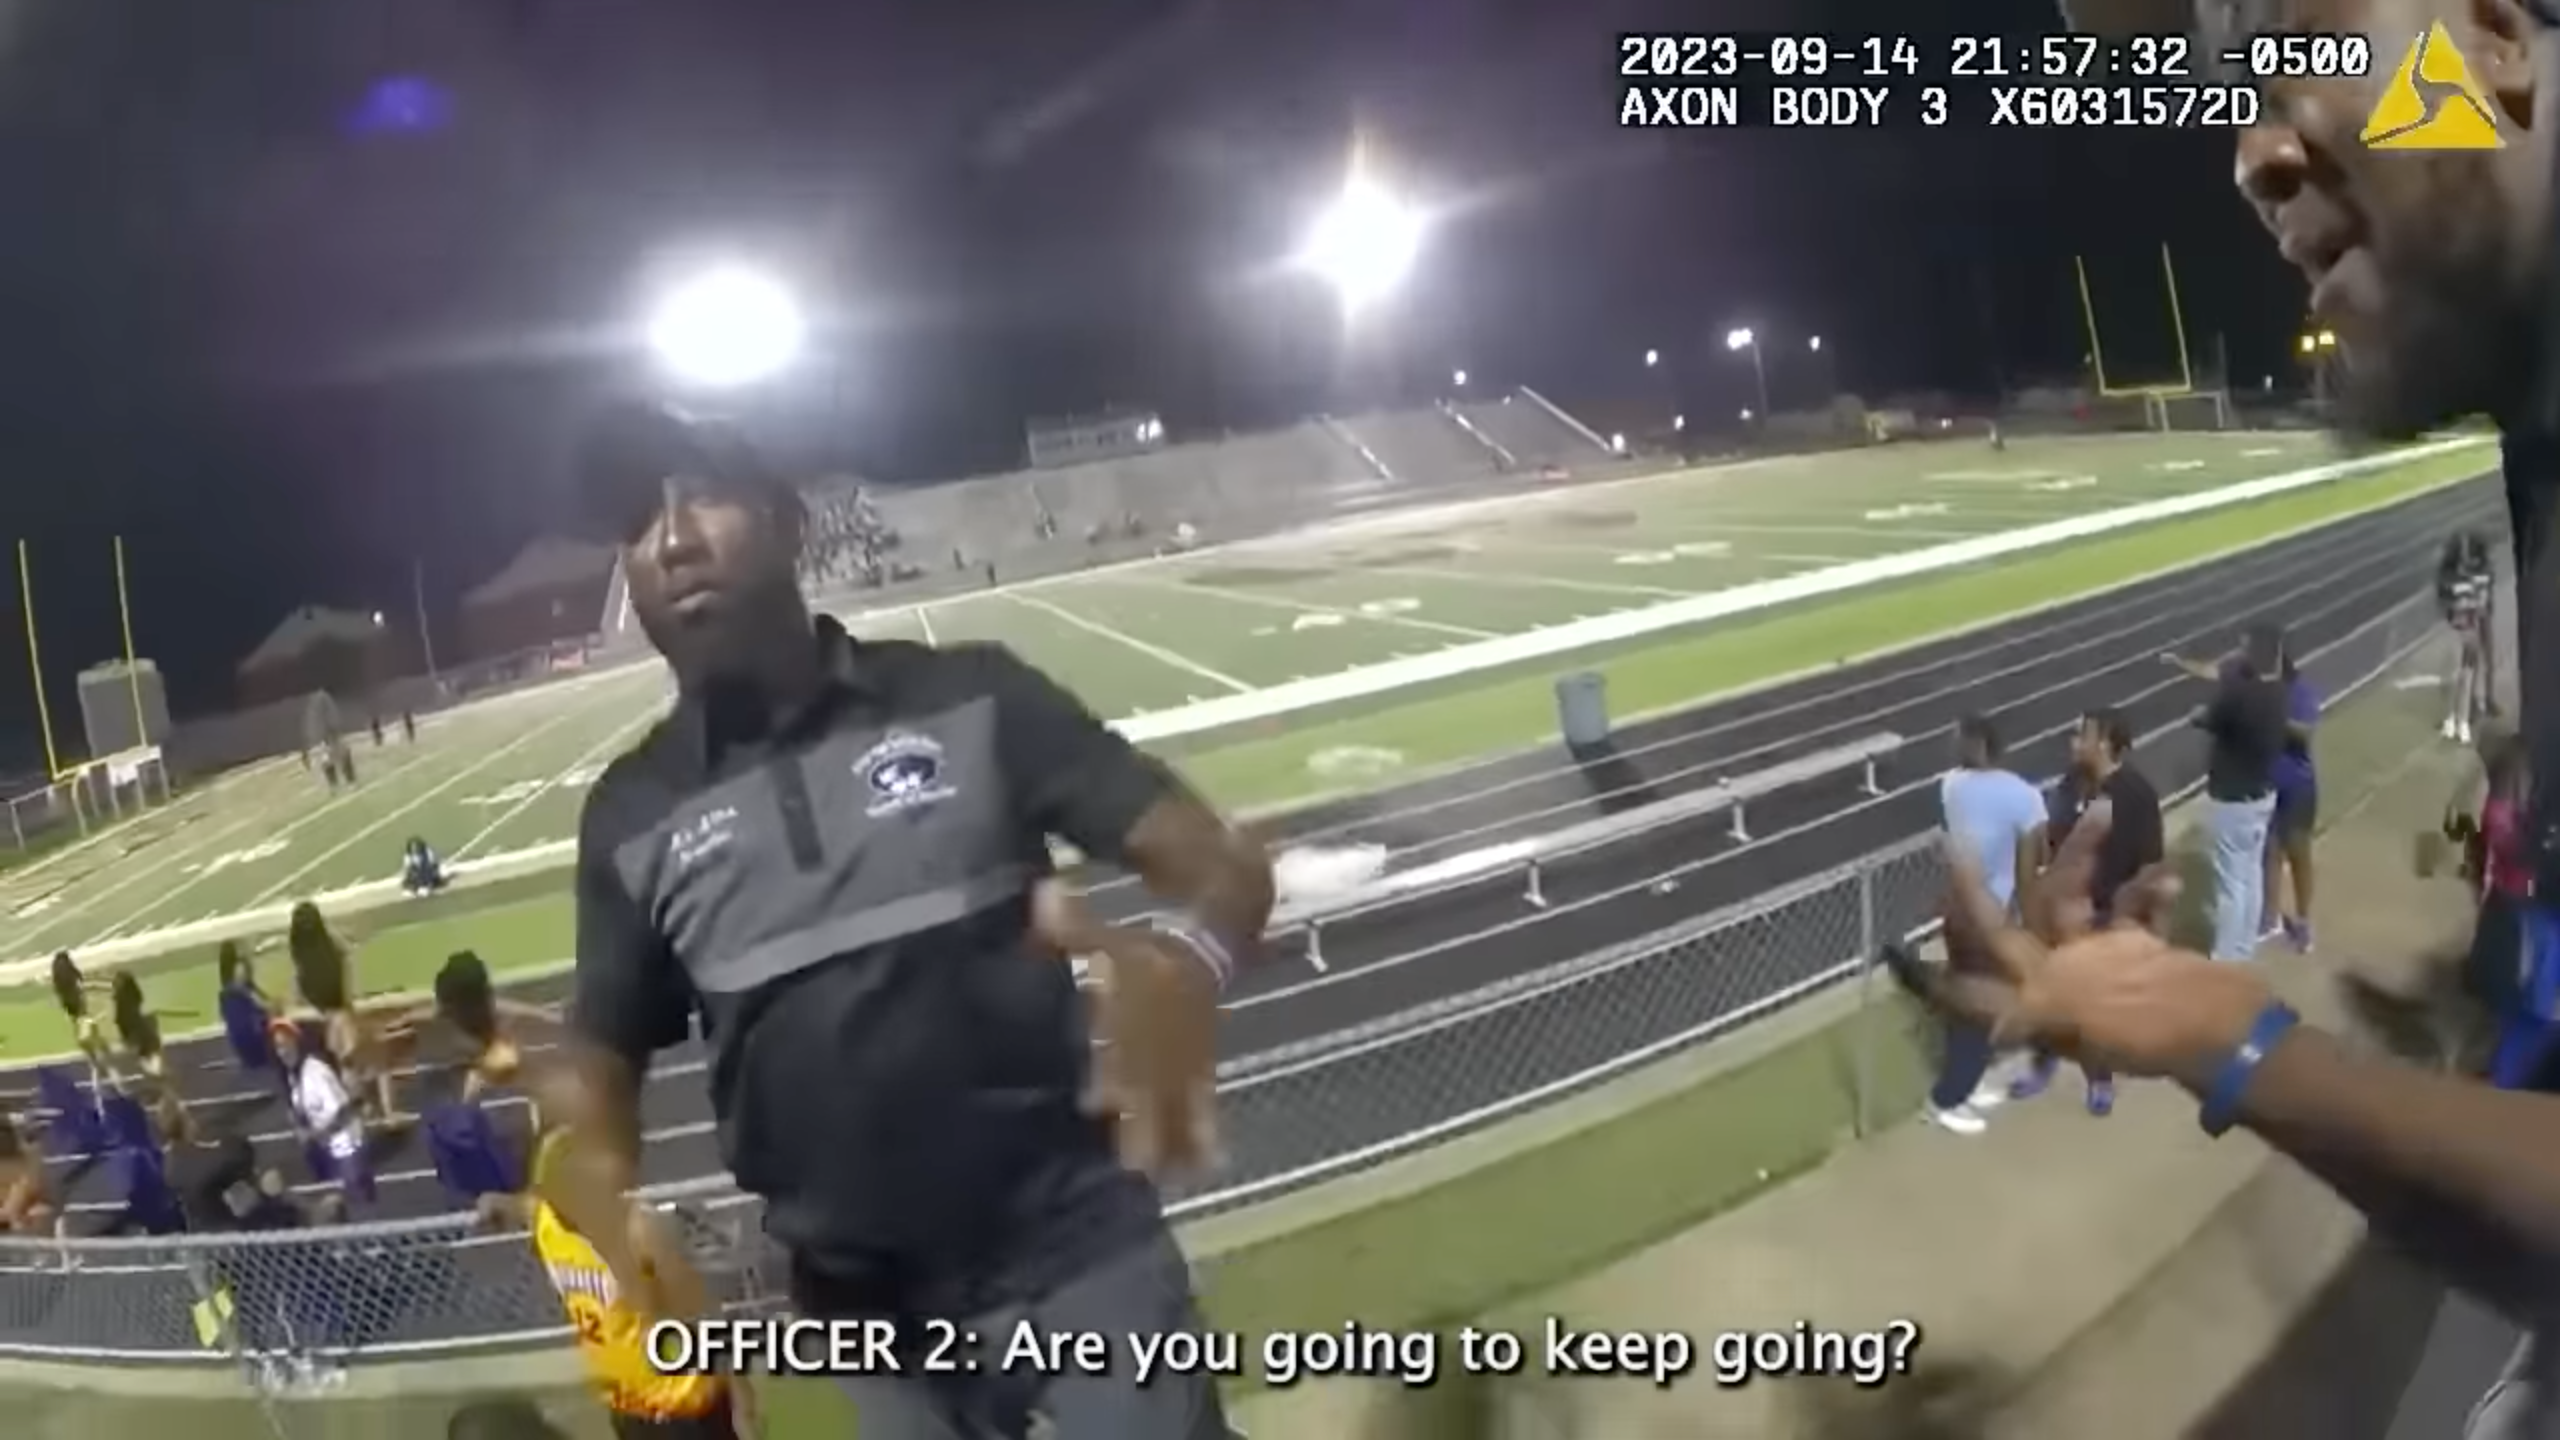 Band director shocked with stun gun, arrested after refusing to stop performance, police say